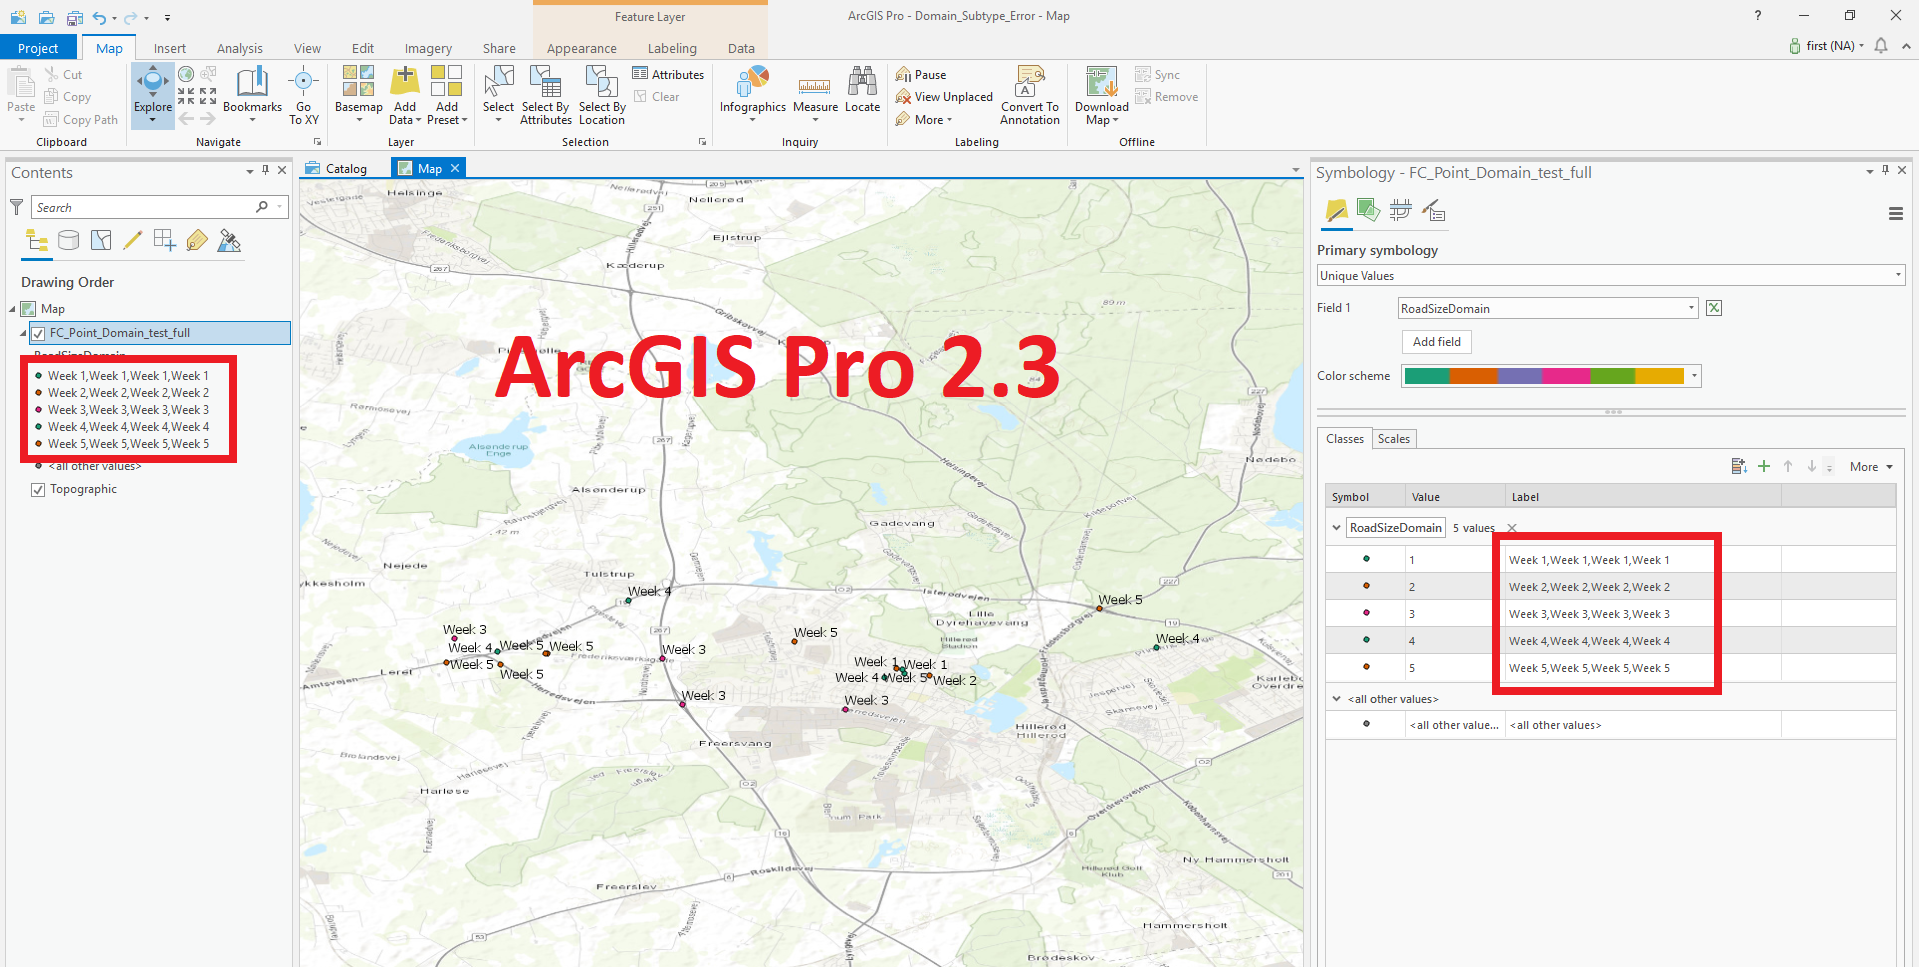 Bug not fixed in ArcGIS Pro 2.3 